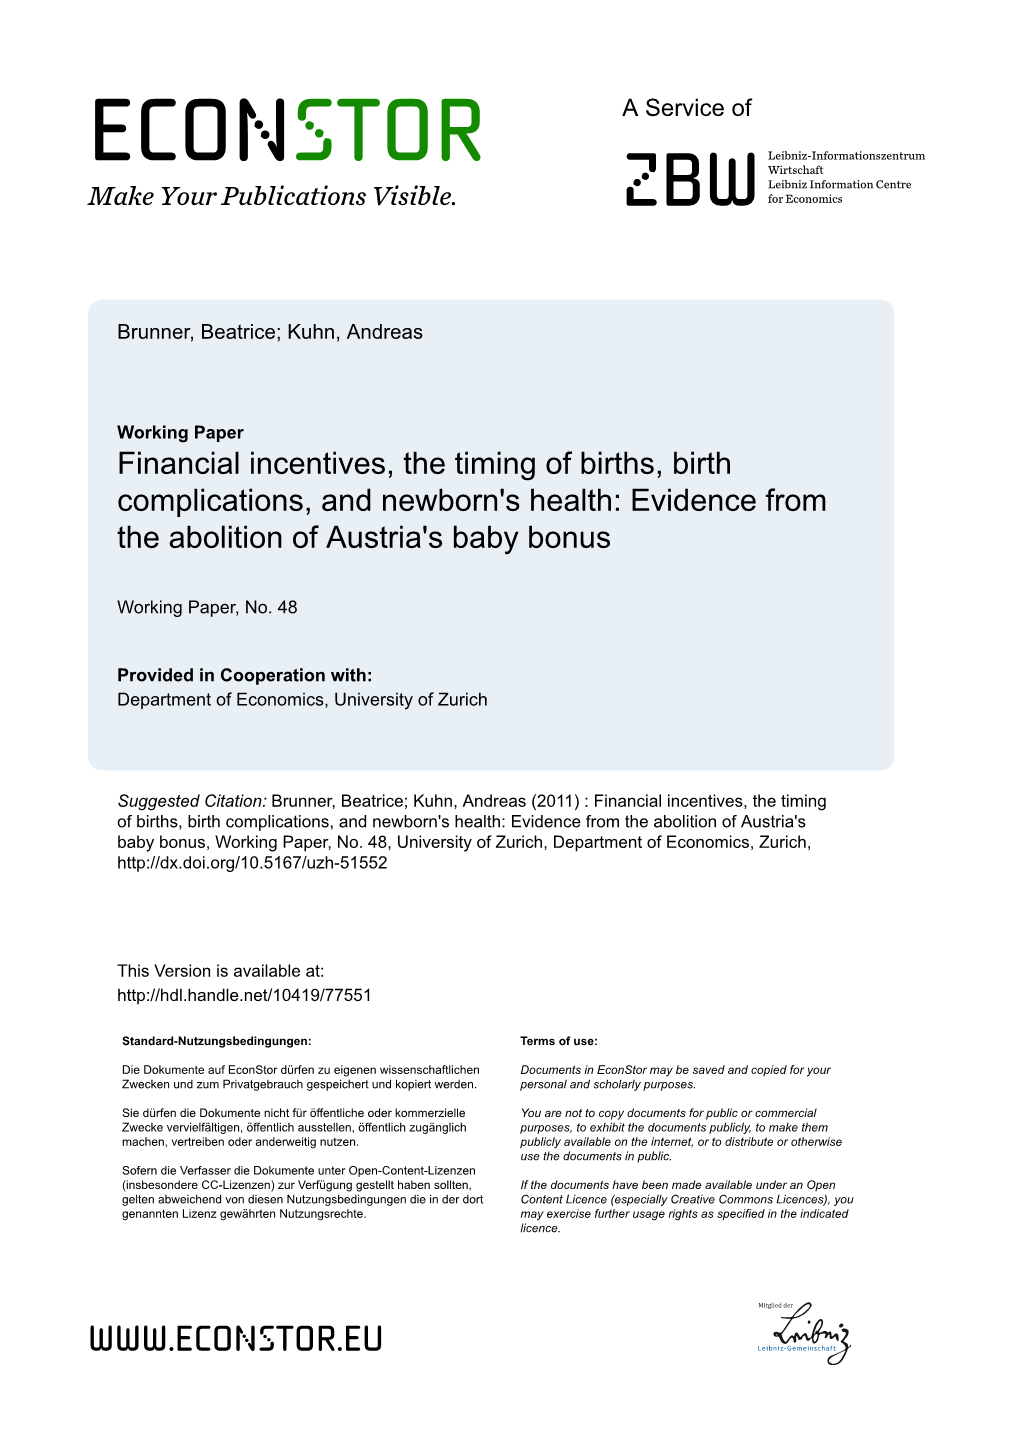 Financial Incentives, the Timing of Births, Birth Complications, and Newborn's Health: Evidence from the Abolition of Austria's Baby Bonus